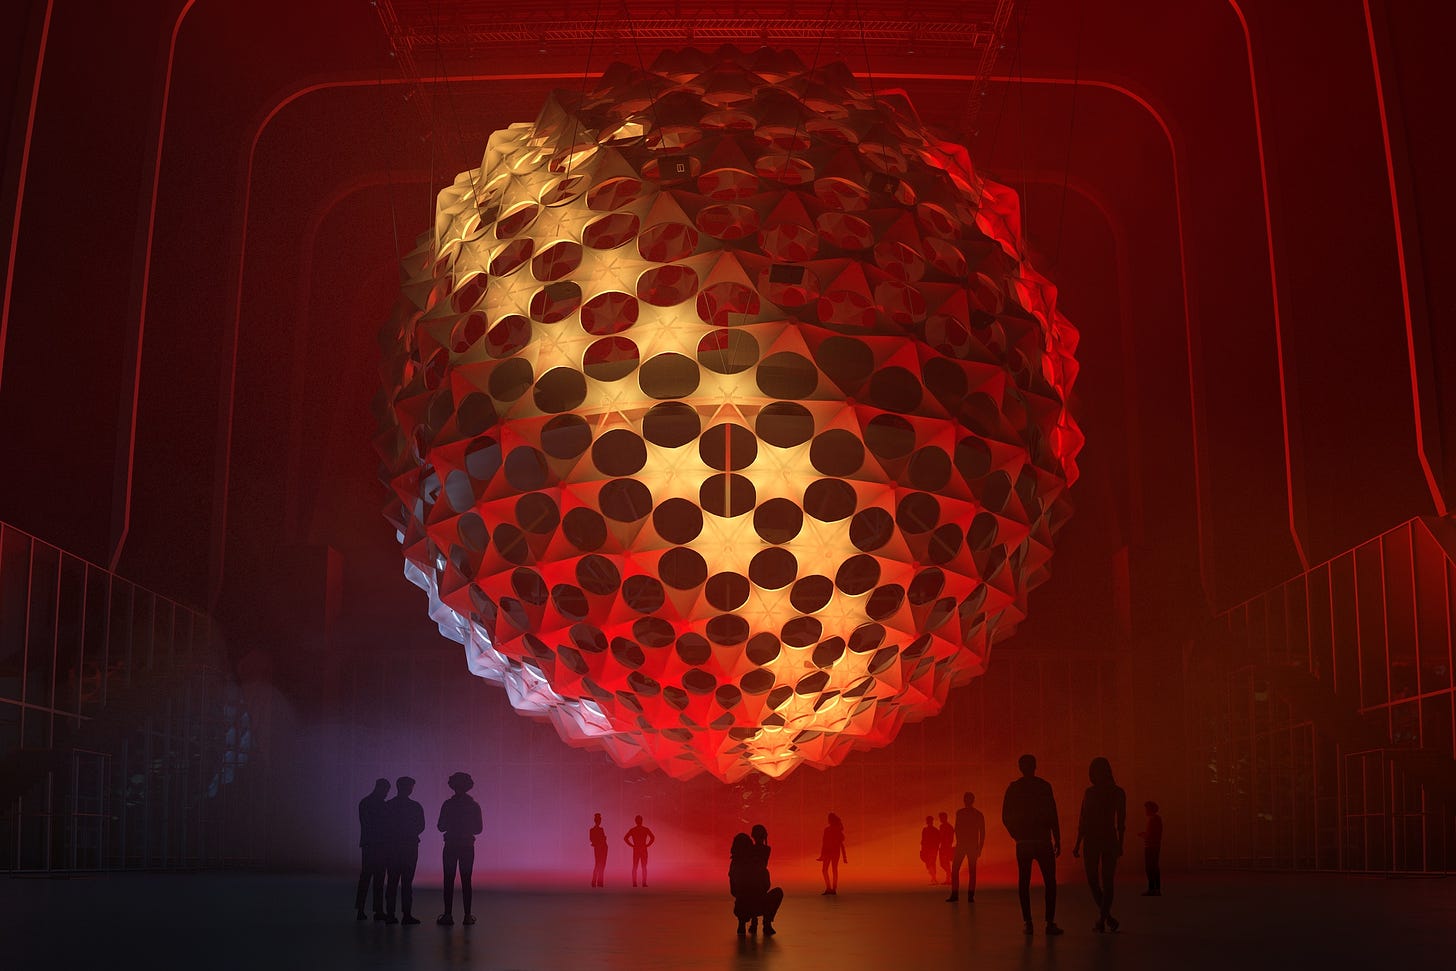 A digital rendering of an enormous spherical concert hall, the Sonic Sphere, in The Shed's McCourt. The sphere is lit in deep red and golden yellow lights. On the floor, visitors stand in small groups looking up at the sphere.